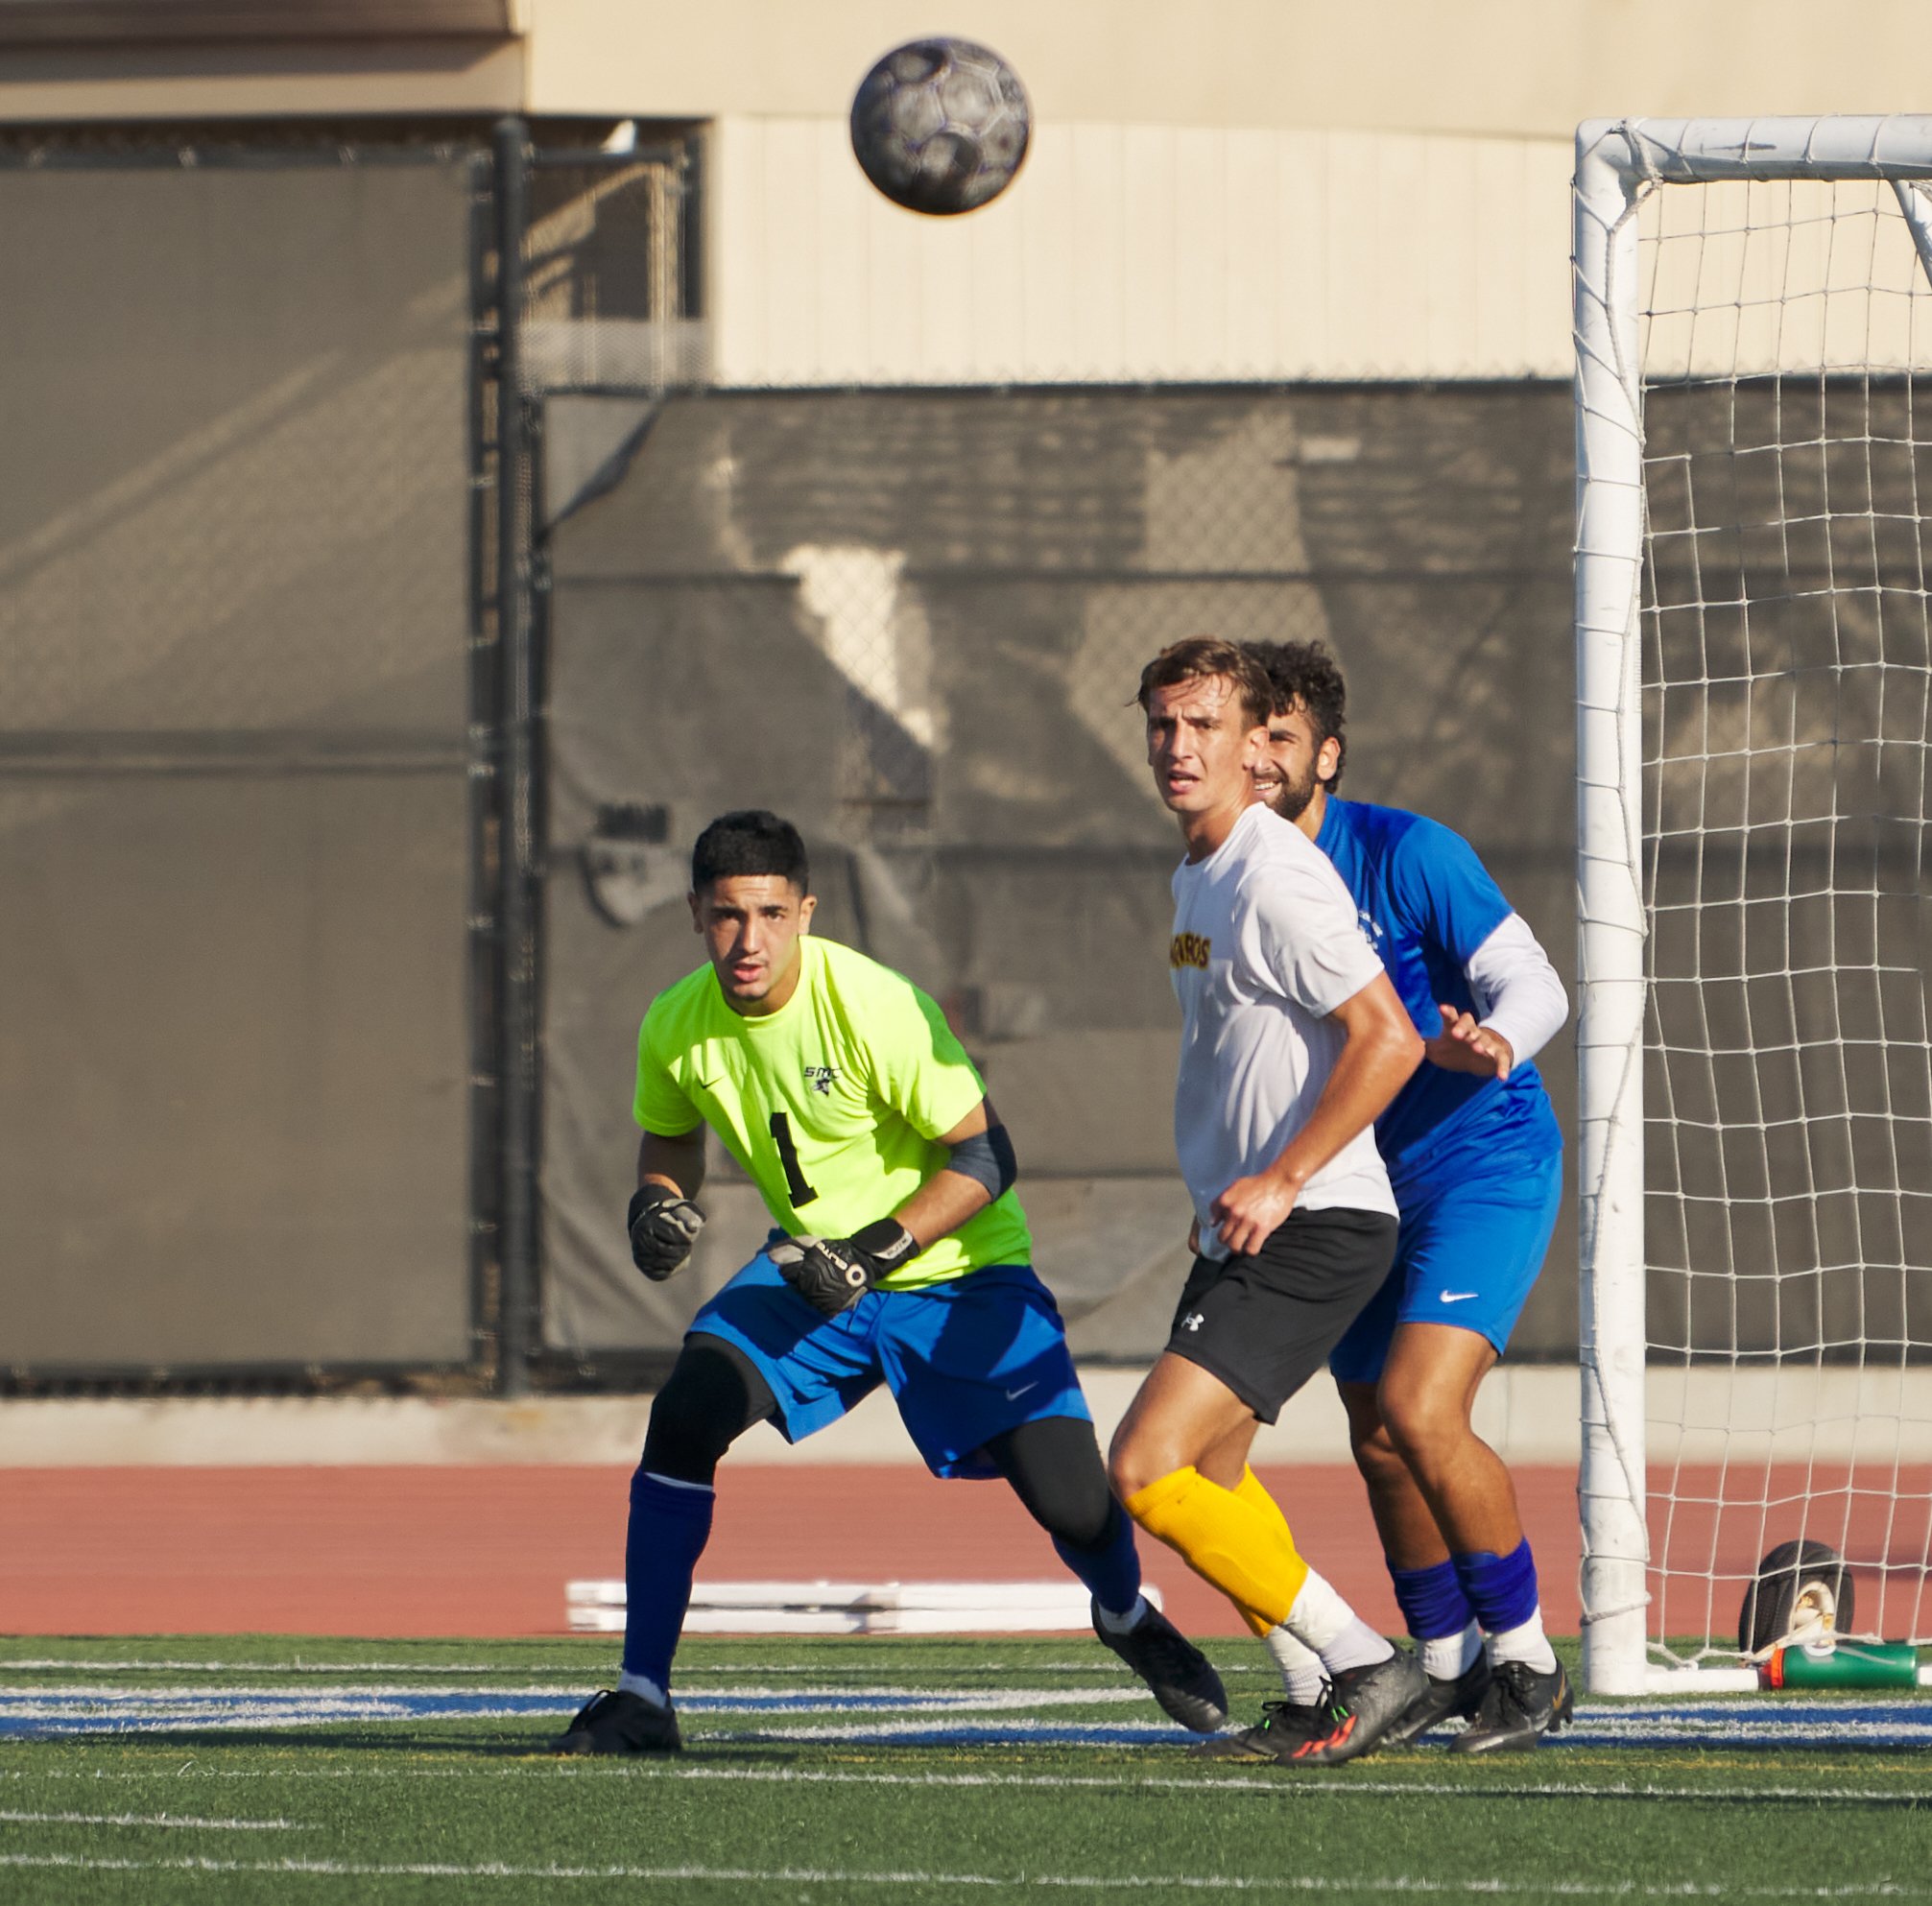  Santa Monica College Corsairs' David Rodriguez and Adam Abou-Hamad (right) and Glendale Community College Vaqueros' Mykhailo Hrabynskyi (center) during the men's soccer match on Tuesday, Sept. 27, 2022, at Corsair Field in Santa Monica, Calif. The C